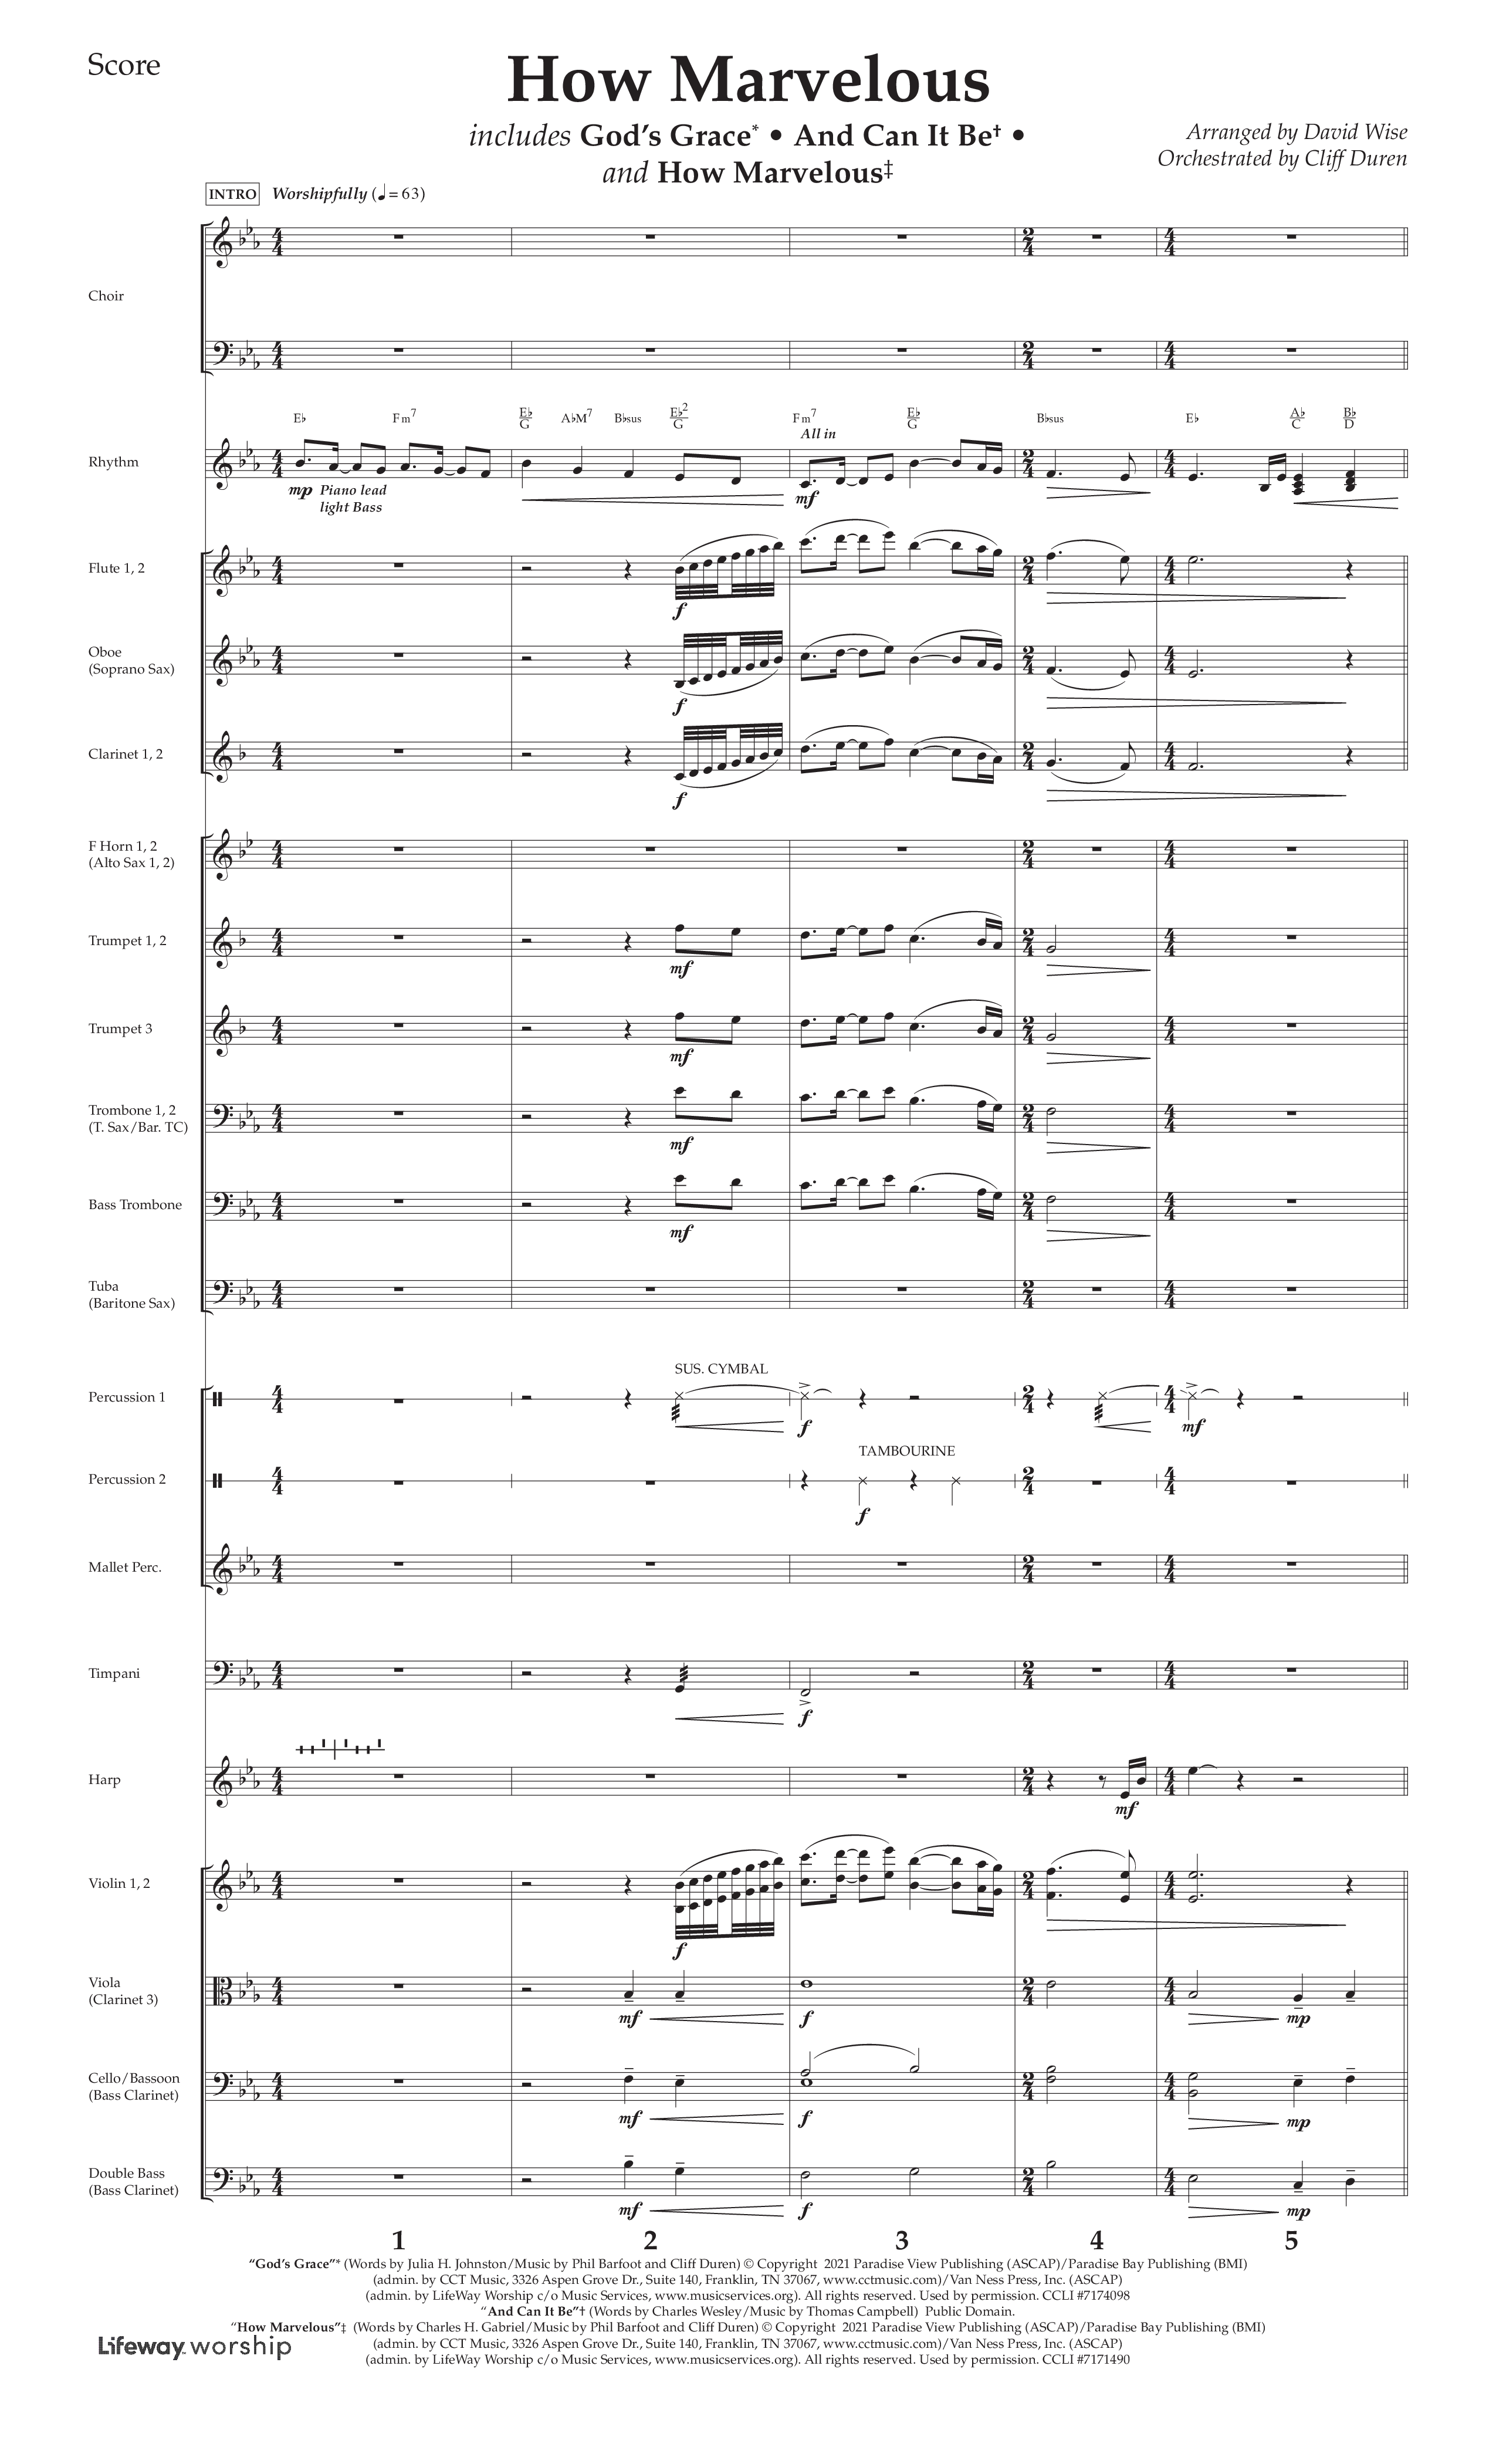 How Marvelous Medley (Choral Anthem SATB) Orchestration (Lifeway Choral / Arr. David Wise / Orch. Cliff Duren)